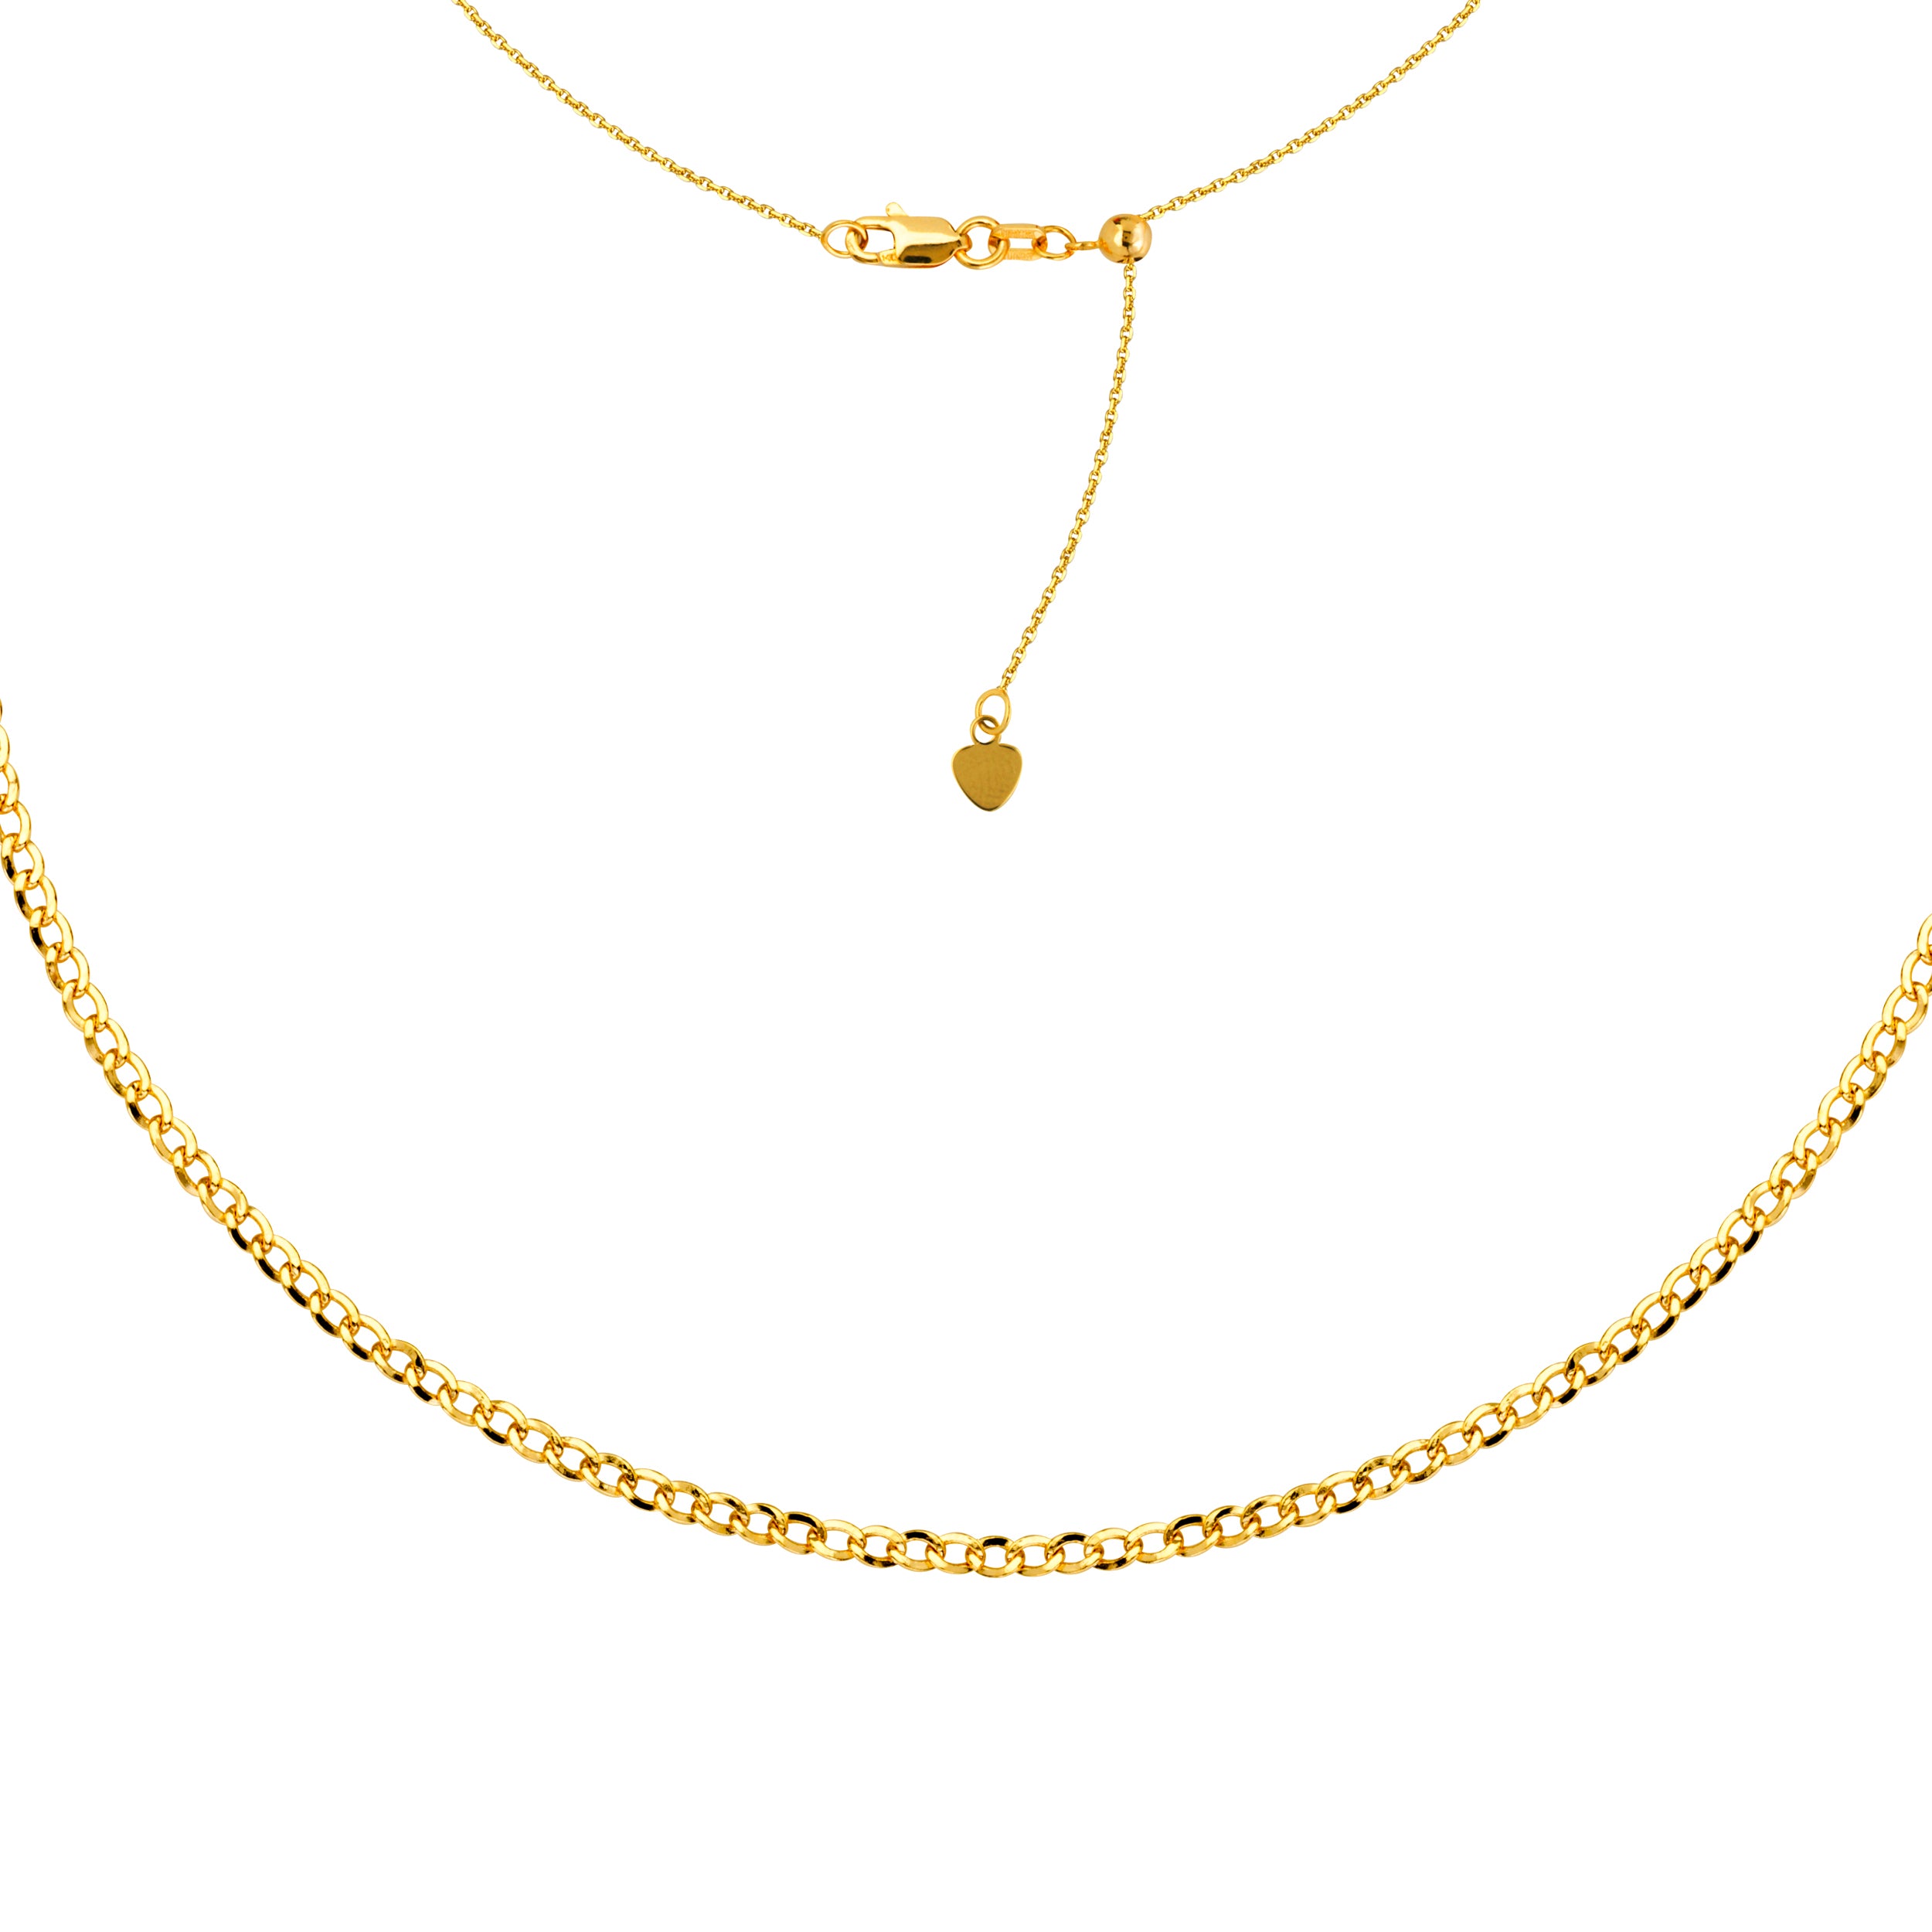 Curb Chain Choker 14k Yellow Gold Necklace, 16" Adjustable